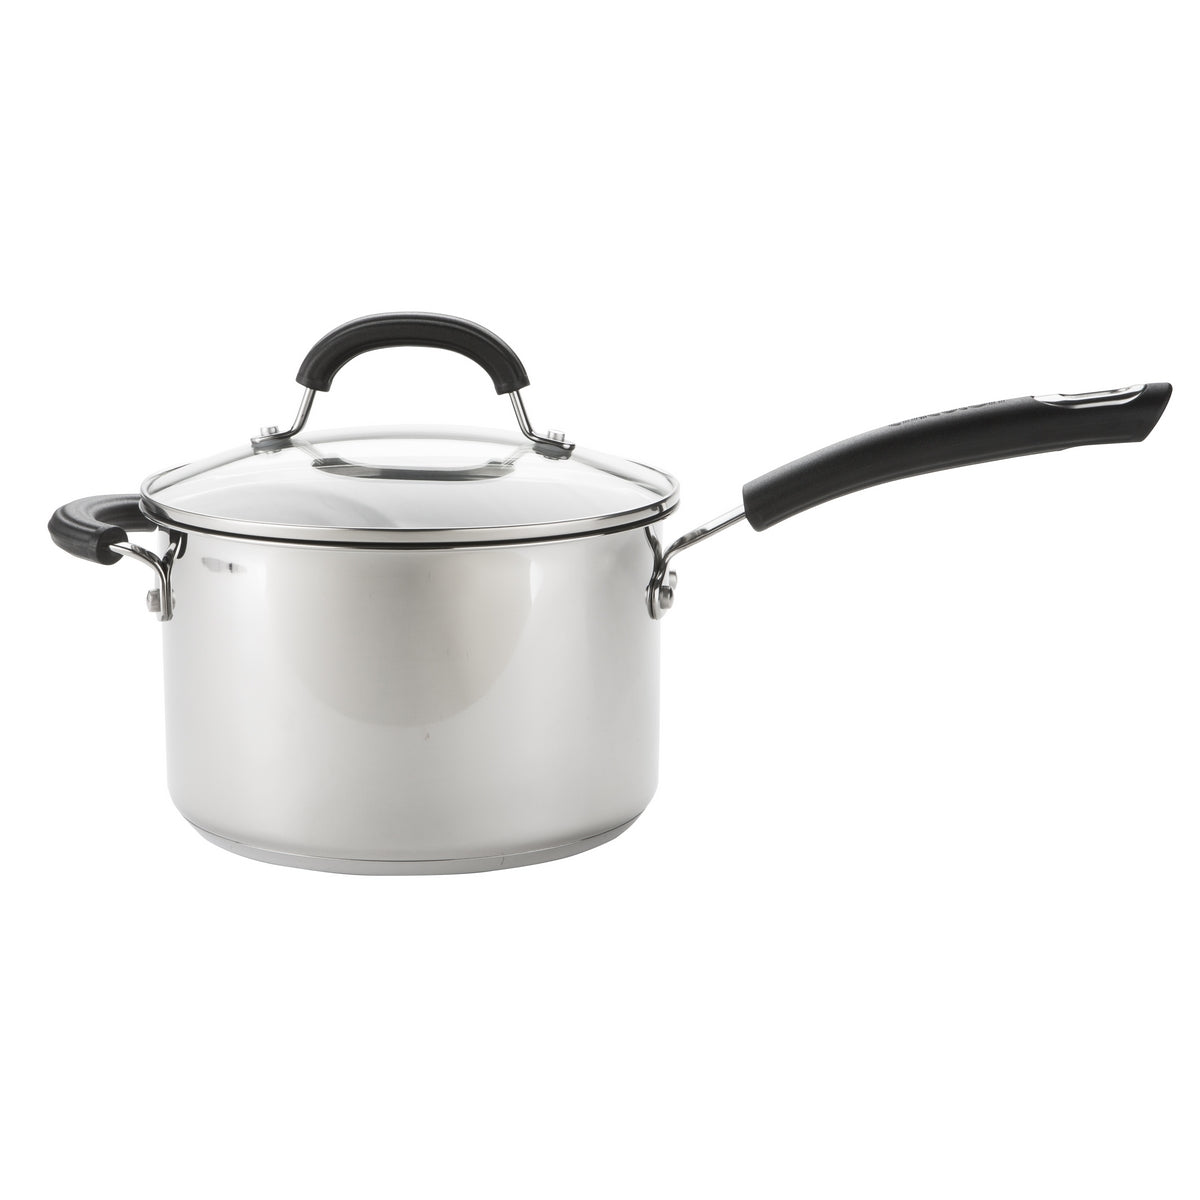 Total Stainless Steel Induction Saucepan & Lid Set - 3 Pieces